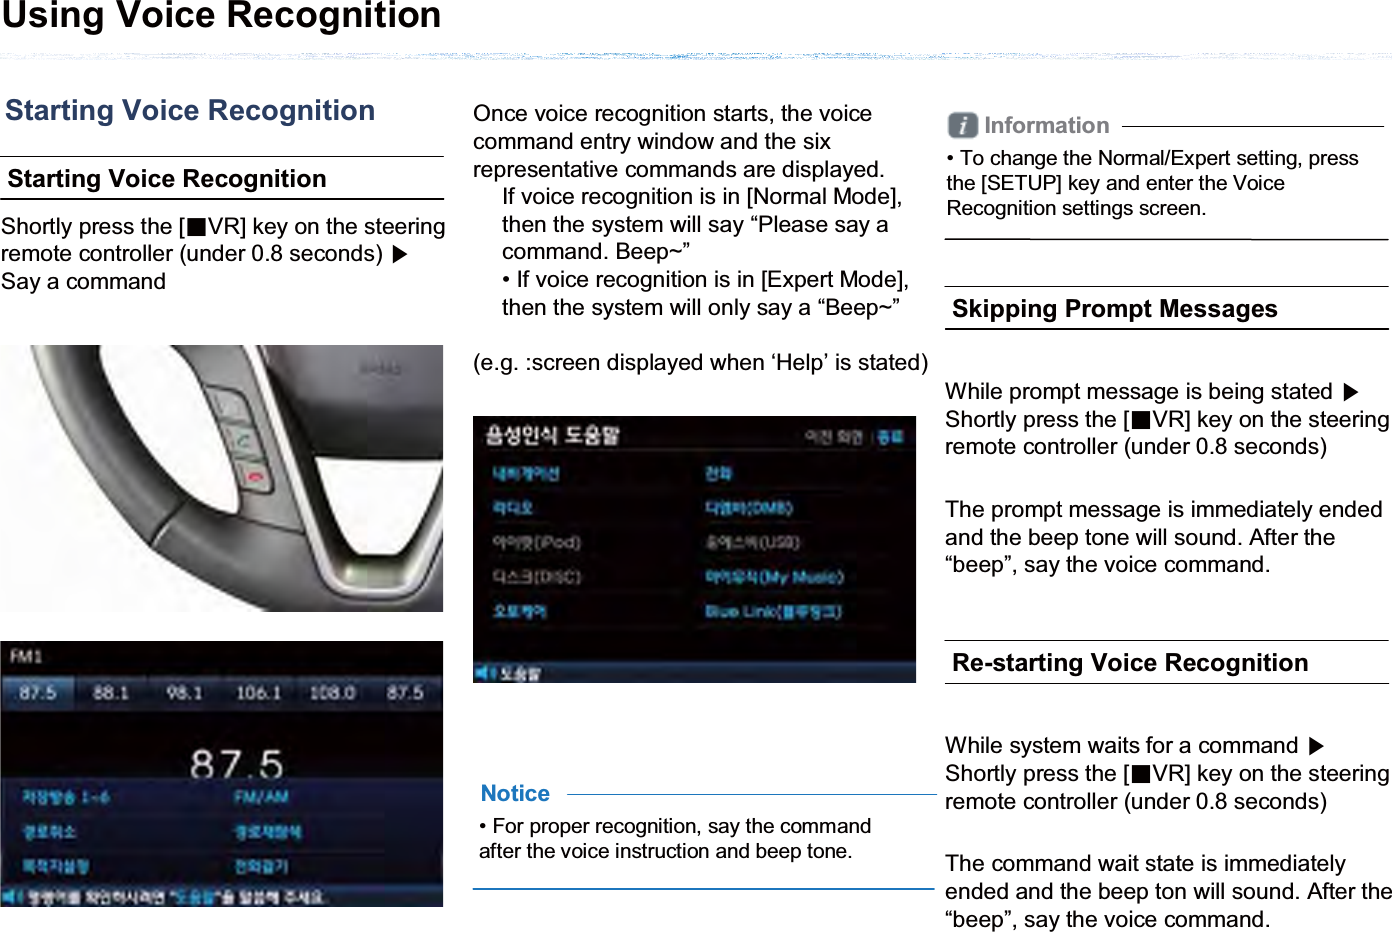 Starting Voice RecognitionStarting Voice Recognition Shortly press the [ȿVR] key on the steering remote controller (under 0.8 seconds) ೛Say a commandOnce voice recognition starts, the voice command entry window and the six representative commands are displayed.If voice recognition is in [Normal Mode], then the system will say “Please say a command. Beep~”• If voice recognition is in [Expert Mode], then the system will only say a “Beep~”(e.g. :screen displayed when ‘Help’ is stated)• For proper recognition, say the command after the voice instruction and beep tone.NoticeInformation• To change the Normal/Expert setting, press the [SETUP] key and enter the Voice Recognition settings screen. Skipping Prompt MessagesWhile prompt message is being stated ೛Shortly press the [ȿVR] key on the steering remote controller (under 0.8 seconds)The prompt message is immediately ended and the beep tone will sound. After the “beep”, say the voice command. Re-starting Voice RecognitionWhile system waits for a command ೛Shortly press the [ȿVR] key on the steering remote controller (under 0.8 seconds)The command wait state is immediately ended and the beep ton will sound. After the “beep”, say the voice command.Using Voice Recognition